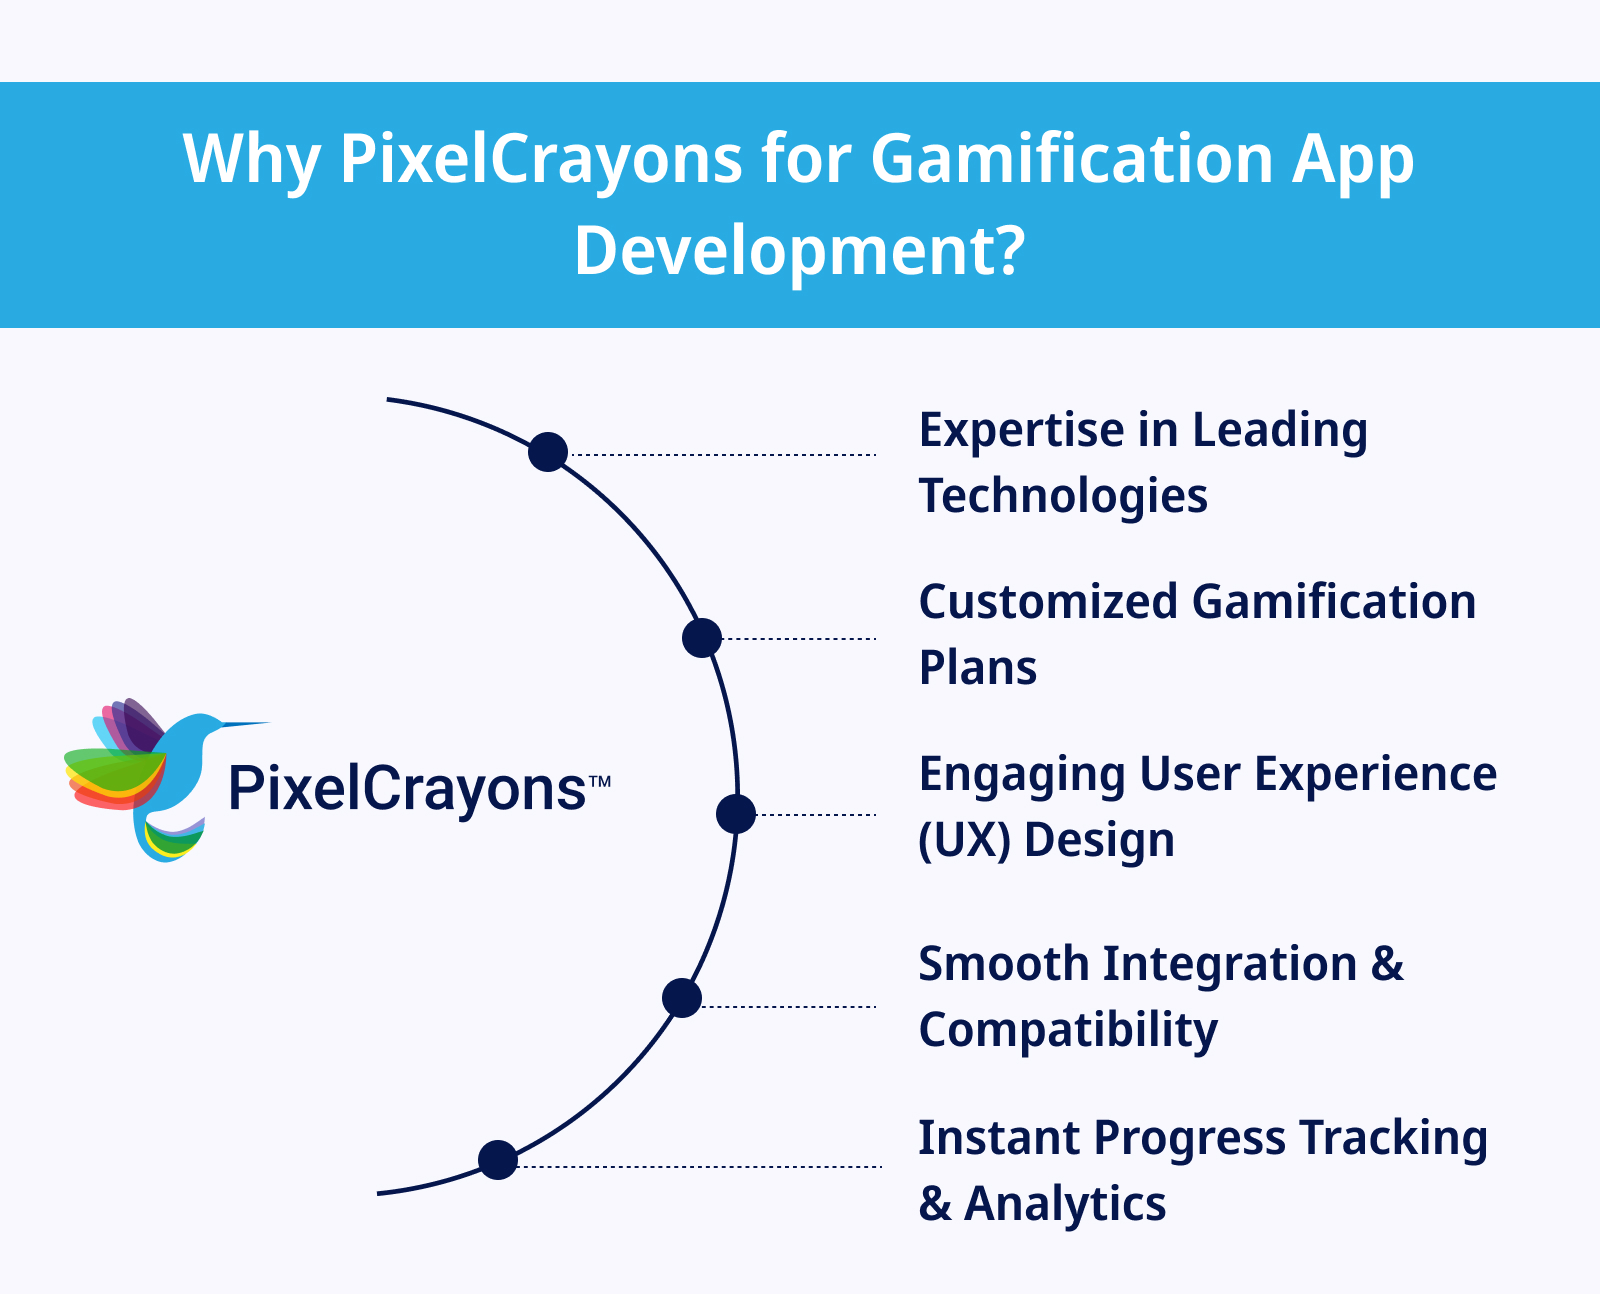 Why PixelCrayons for Gamification App Development